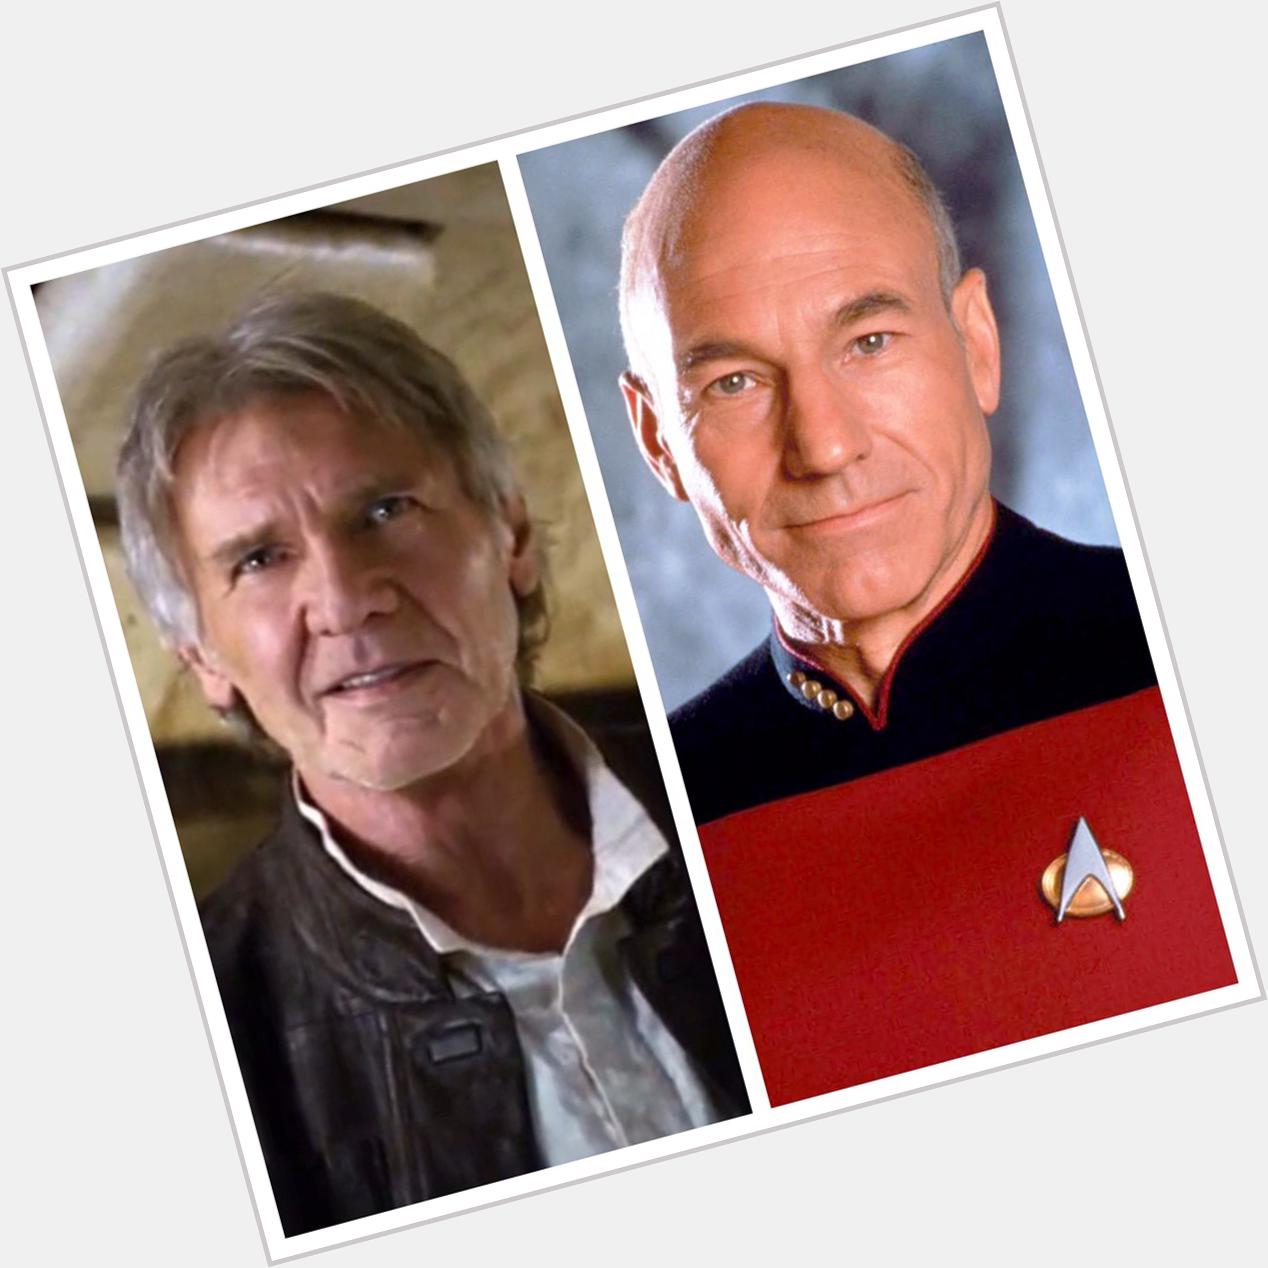 Wishing a very Happy Birthday to Harrison Ford and Sir Patrick Stewart!  